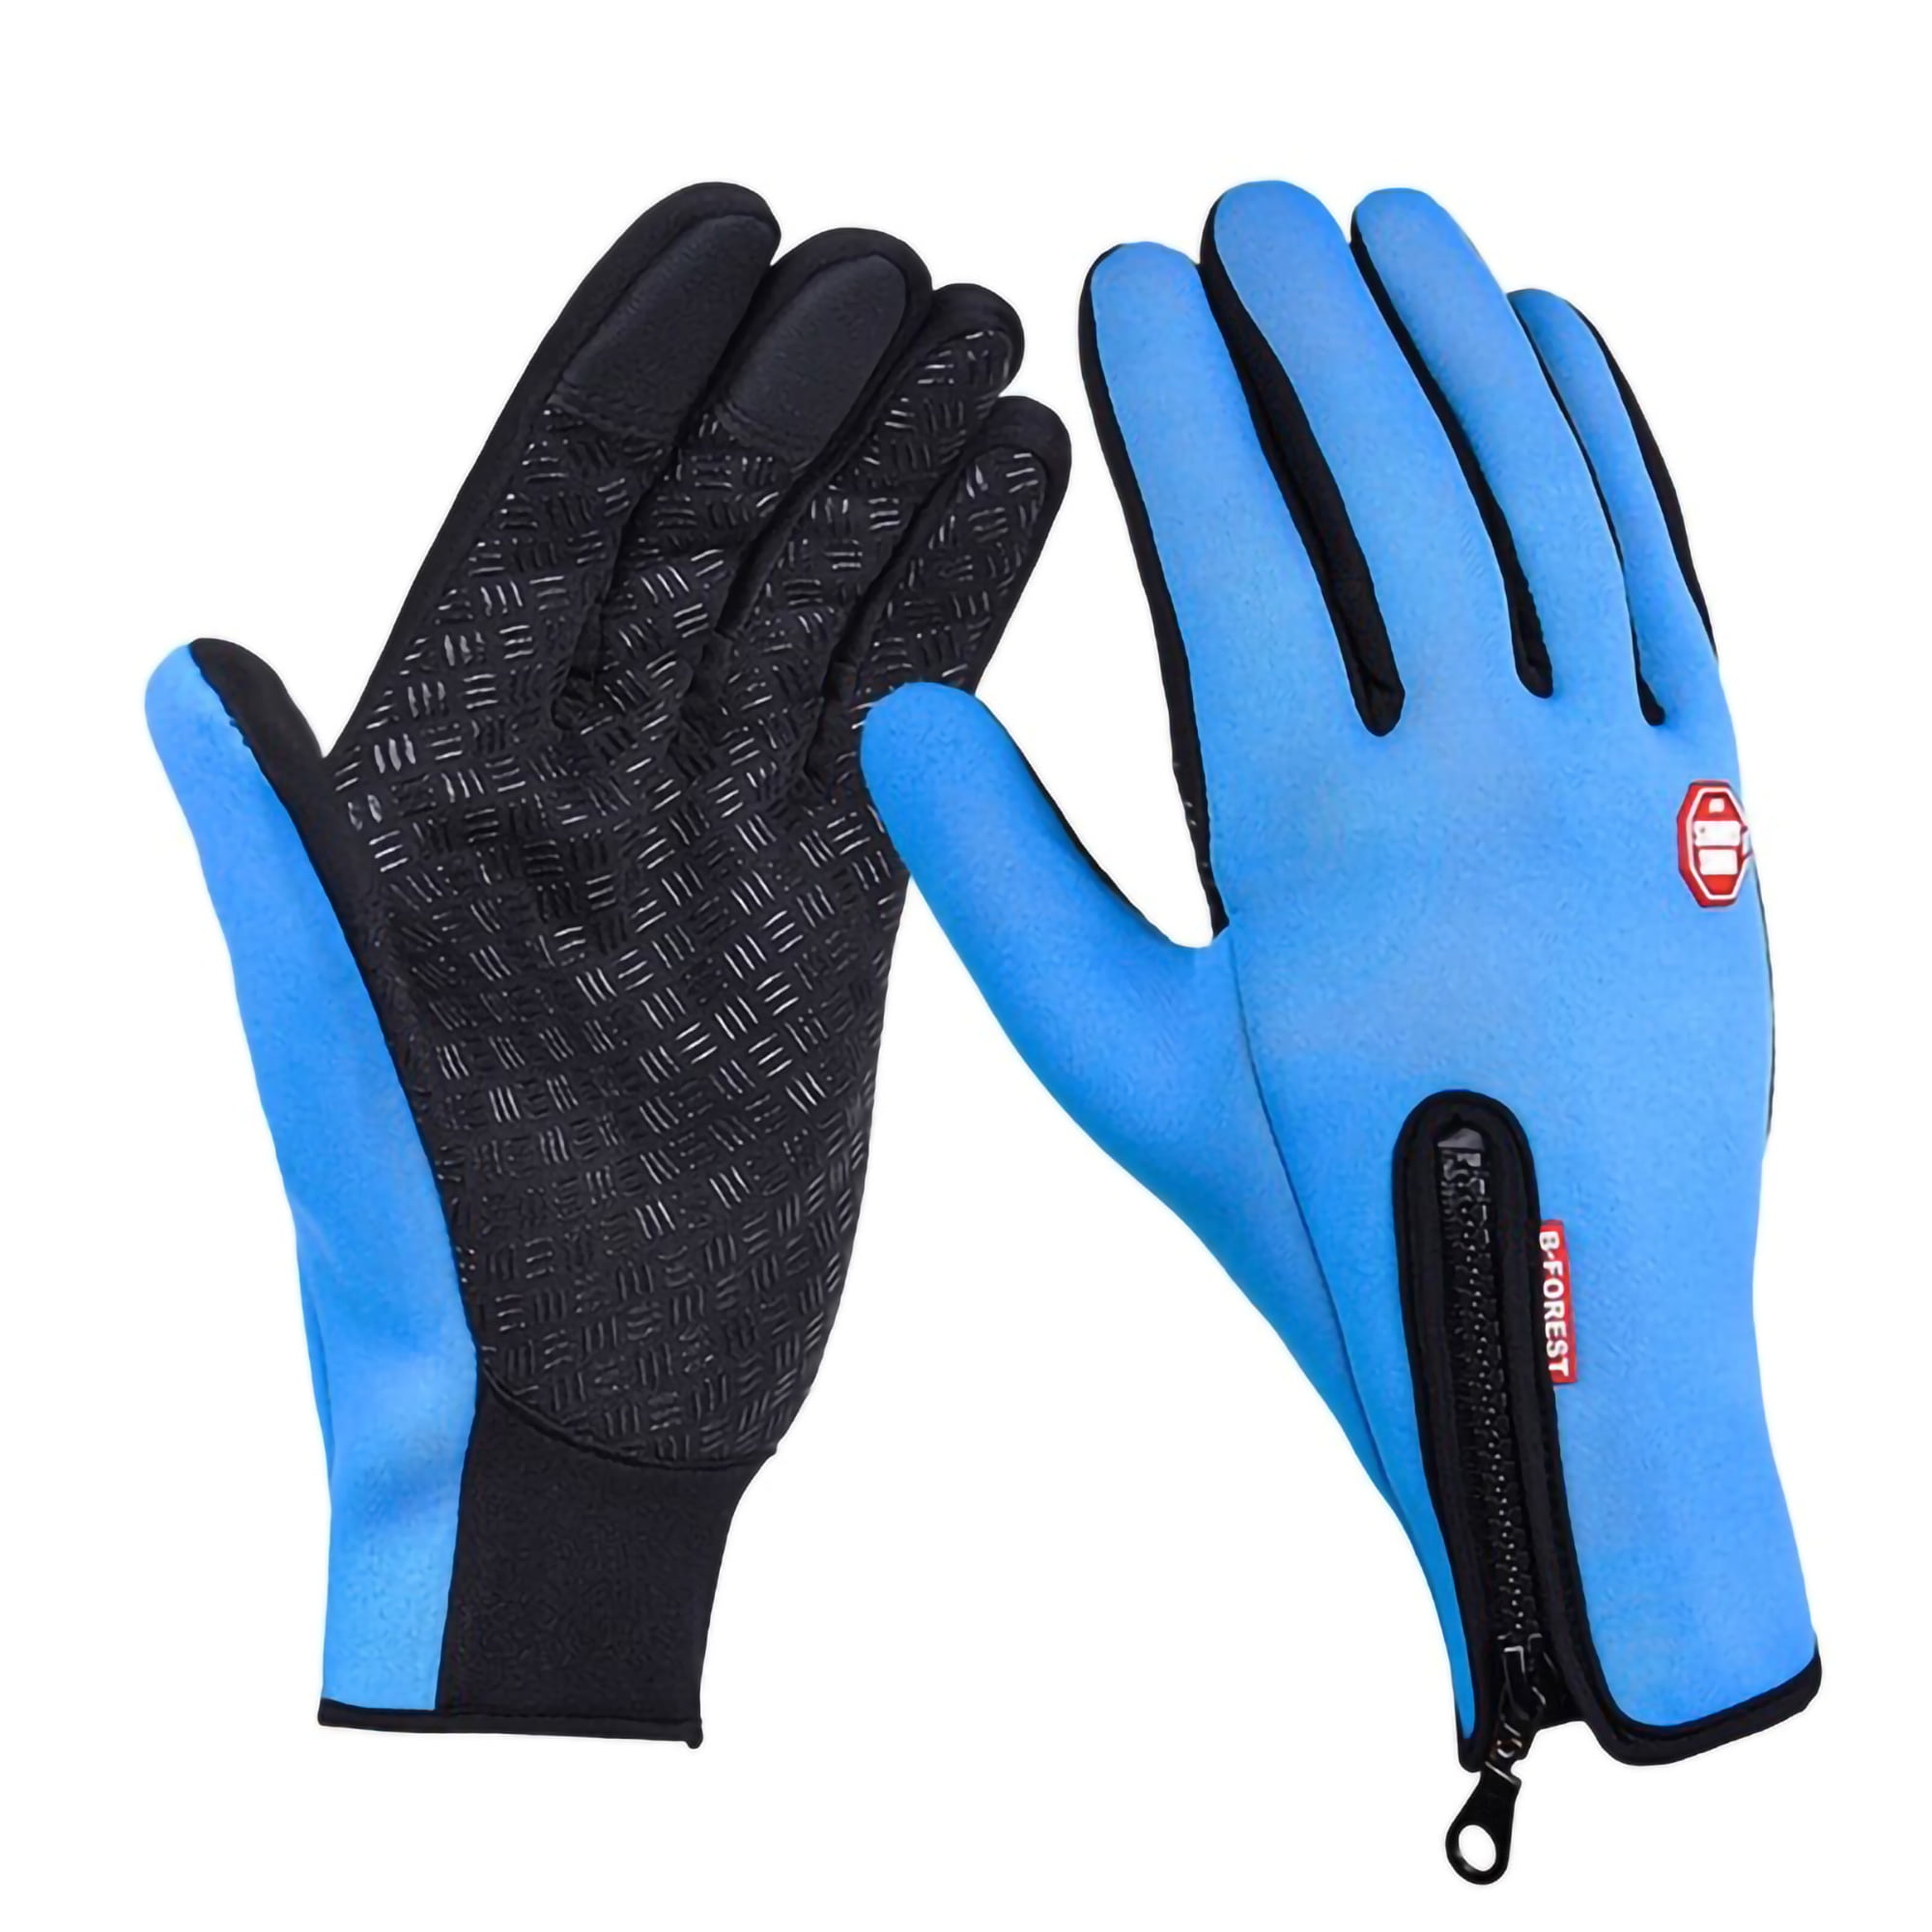 Touch Screen & Windproof Outdoor Sports Cycling Hiking Full Finger Gloves Mitts 